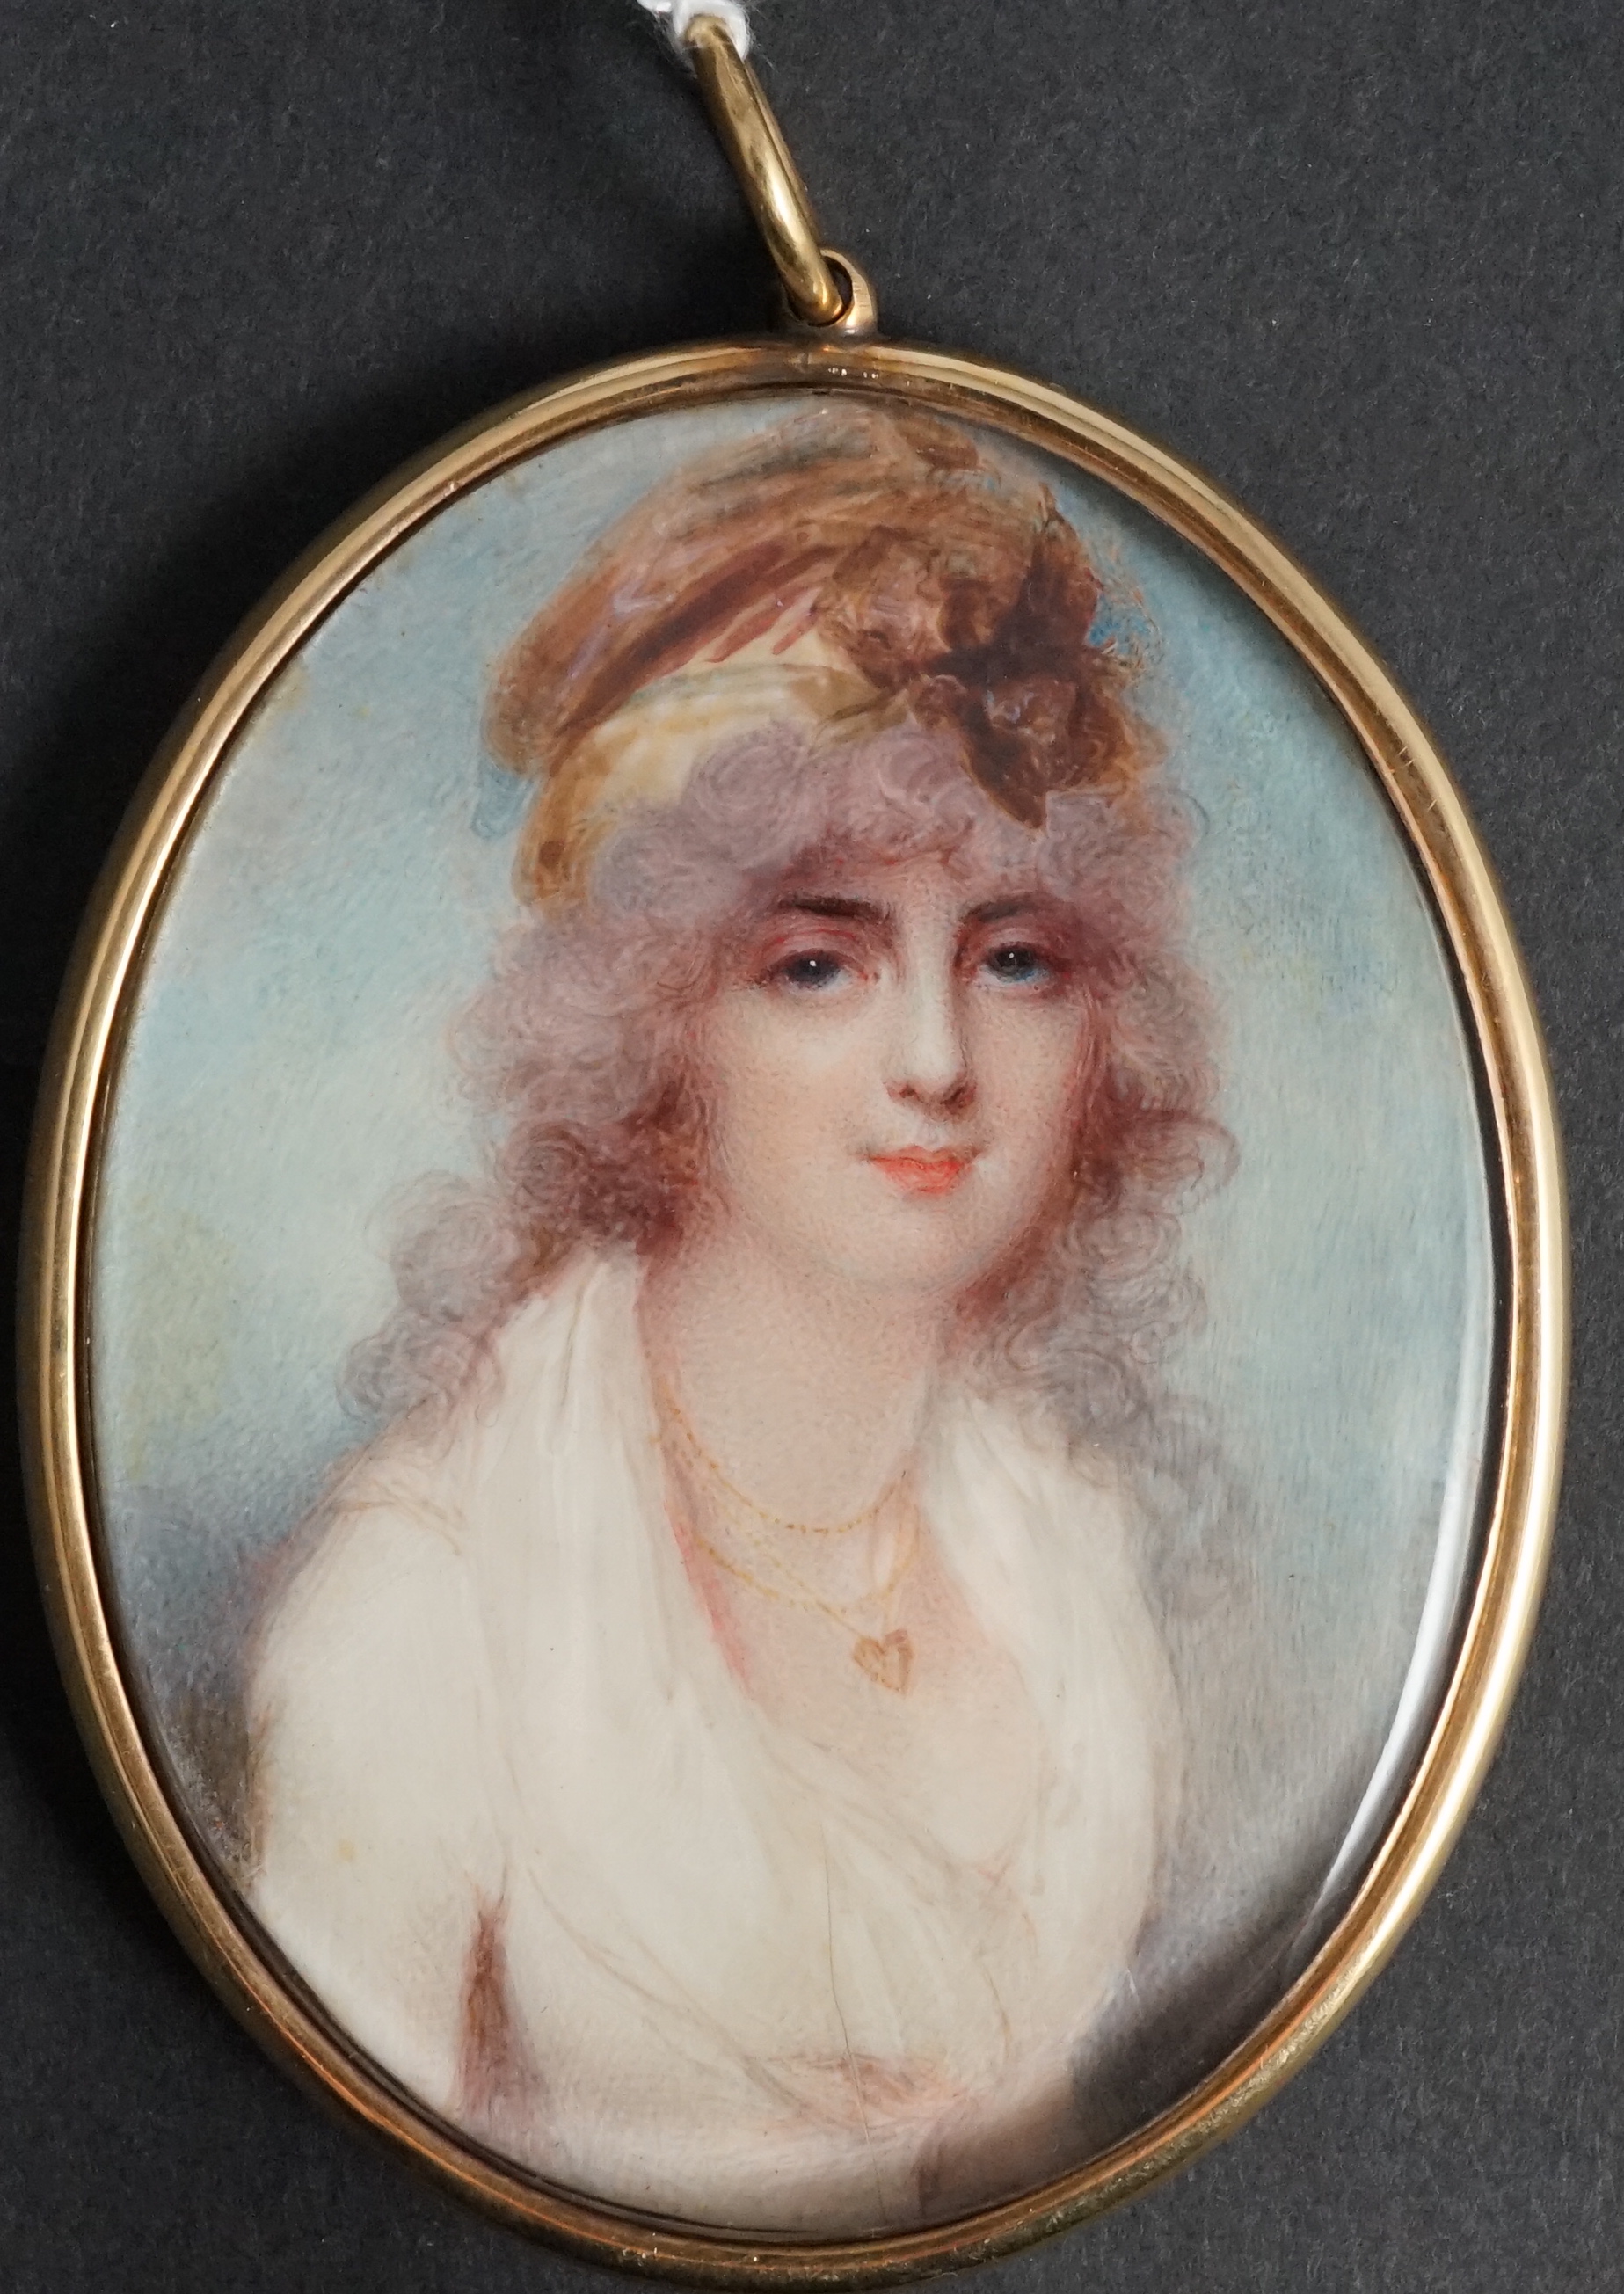 Mrs Anne Mee, née Foldsone (British, 1775-1851), Portrait miniature of a lady wearing a white dress and gold chain with a heart shaped locket, watercolour on ivory, 7.6 x 5.8cm. CITES Submission reference HQJ8KNQ9